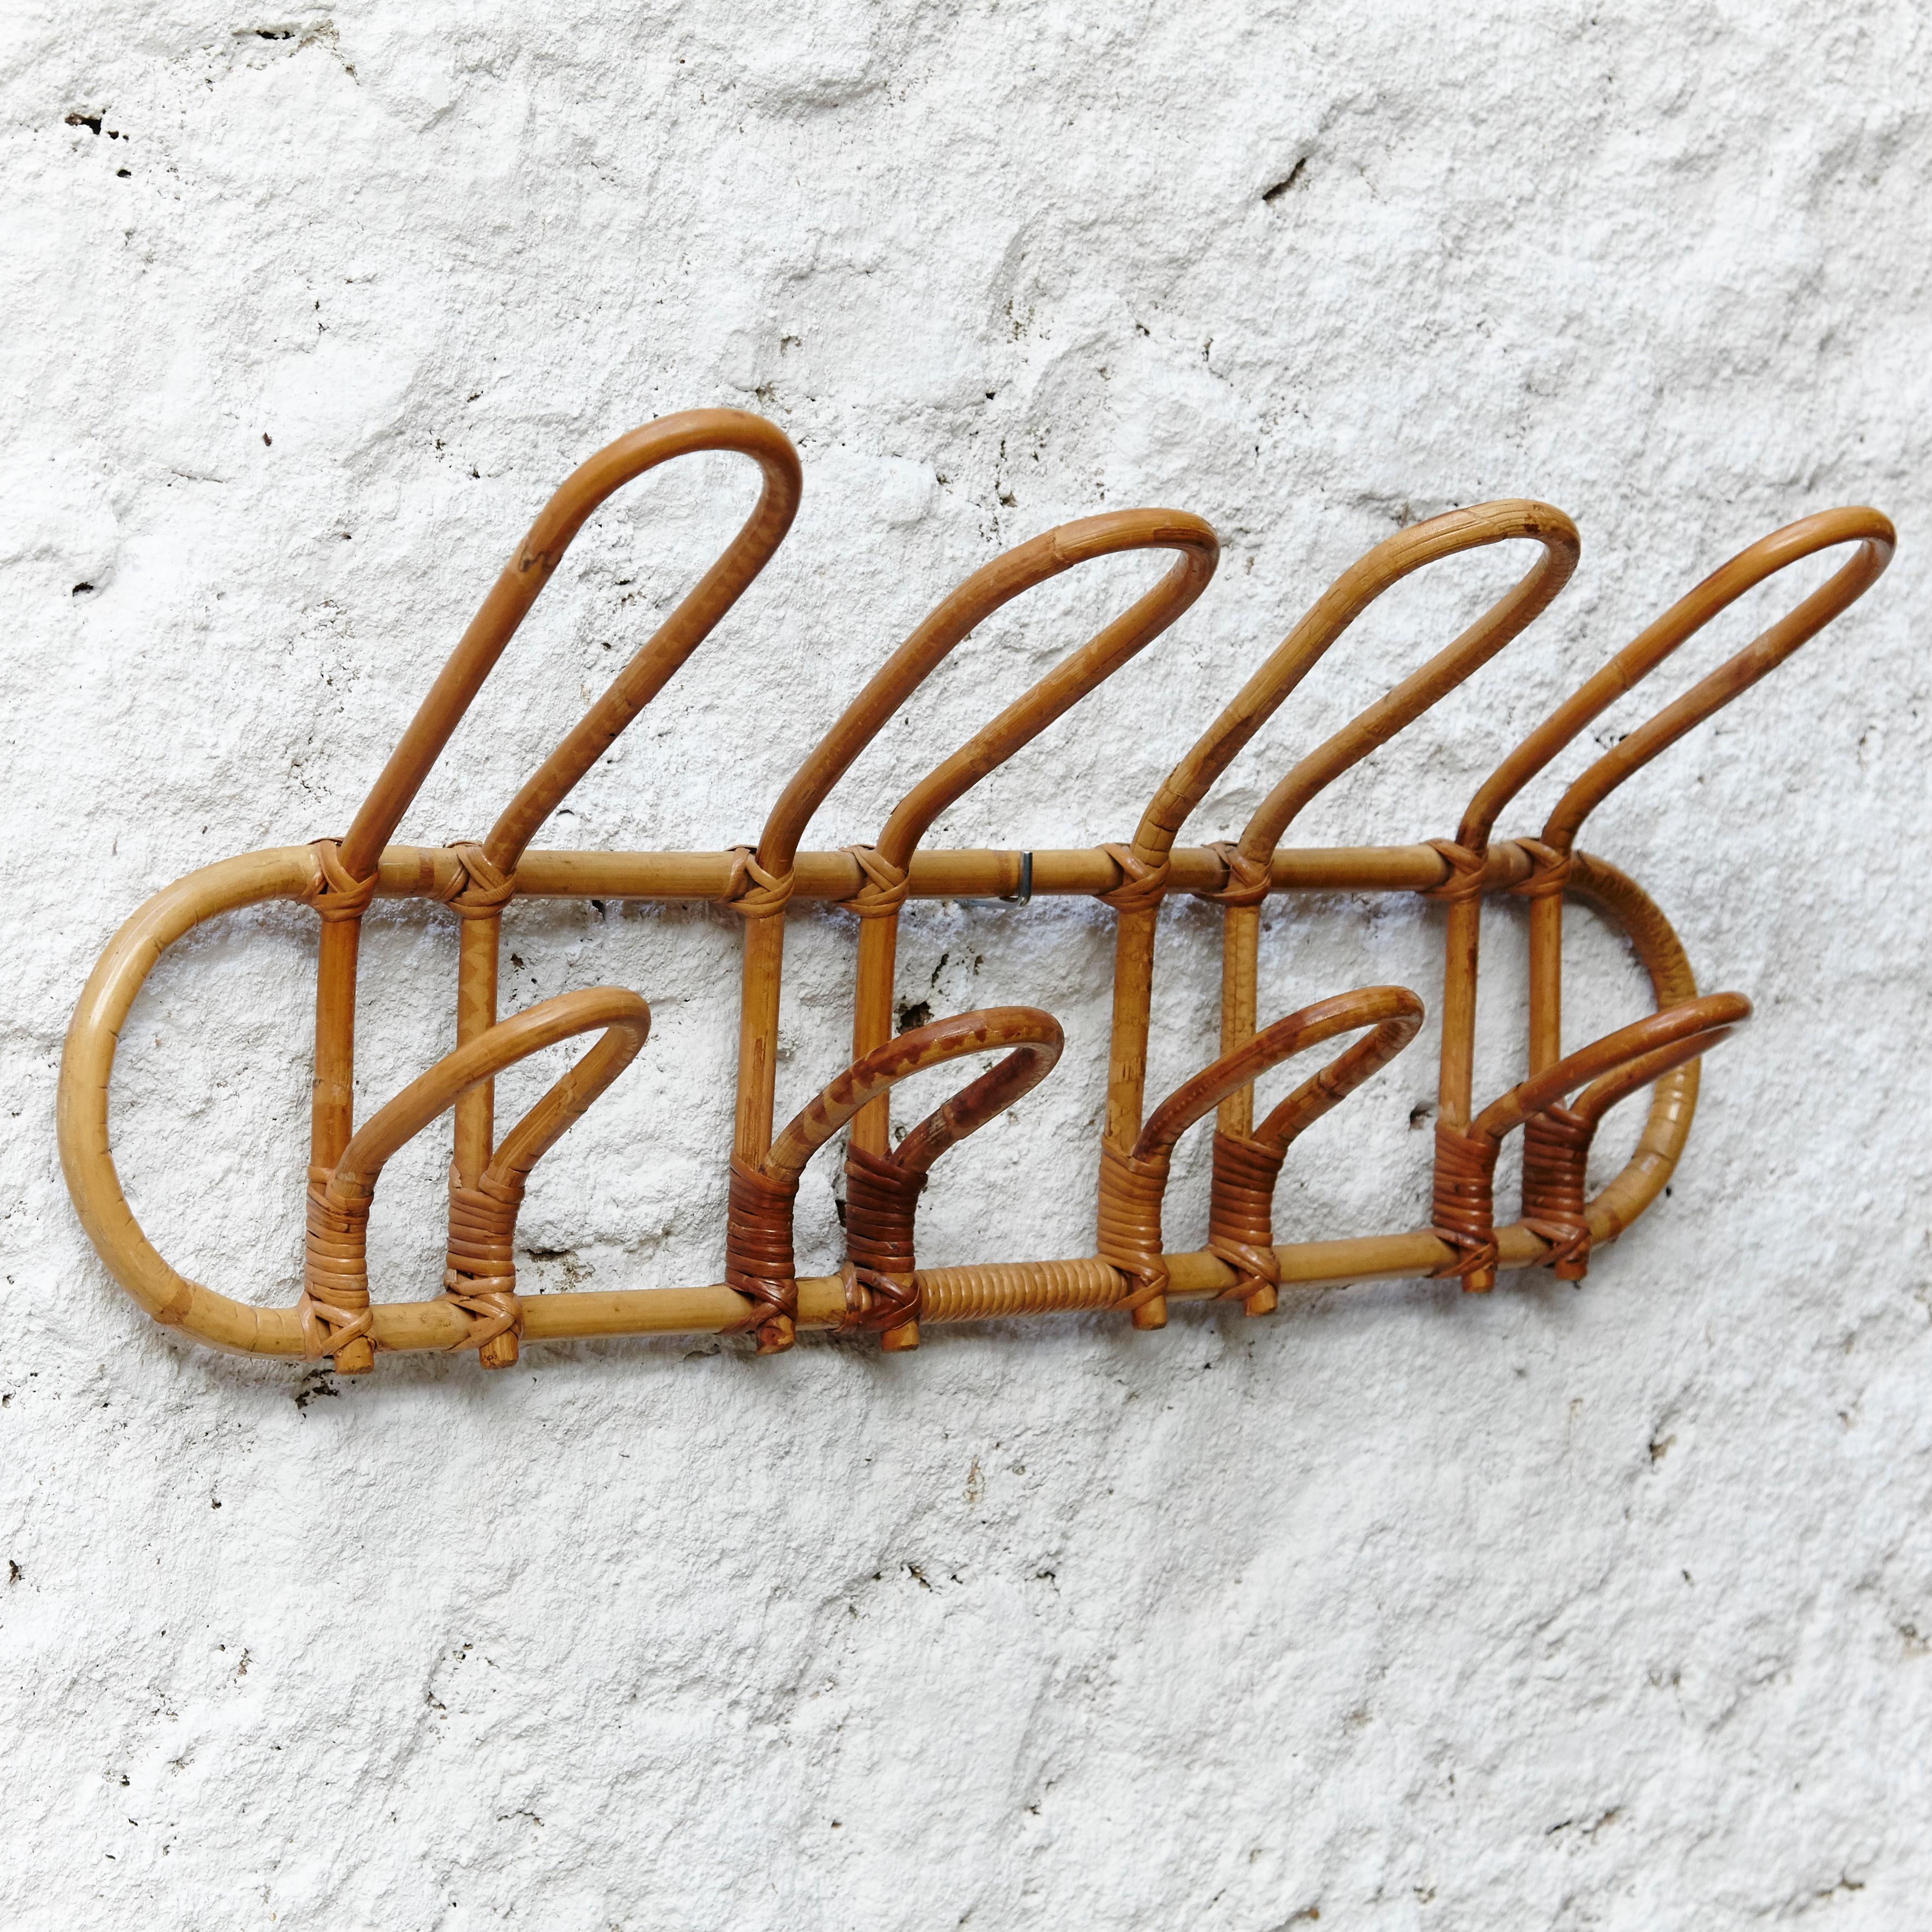 An organic shaped rattan coat hanger.
Manufactured in France circa 1950 by Unknown Manufacturer.
All in Rattan.

In good original condition with minor wear consistent of age and use, preserving a beautiful patina.

Measurements:
35cm H x 80cm